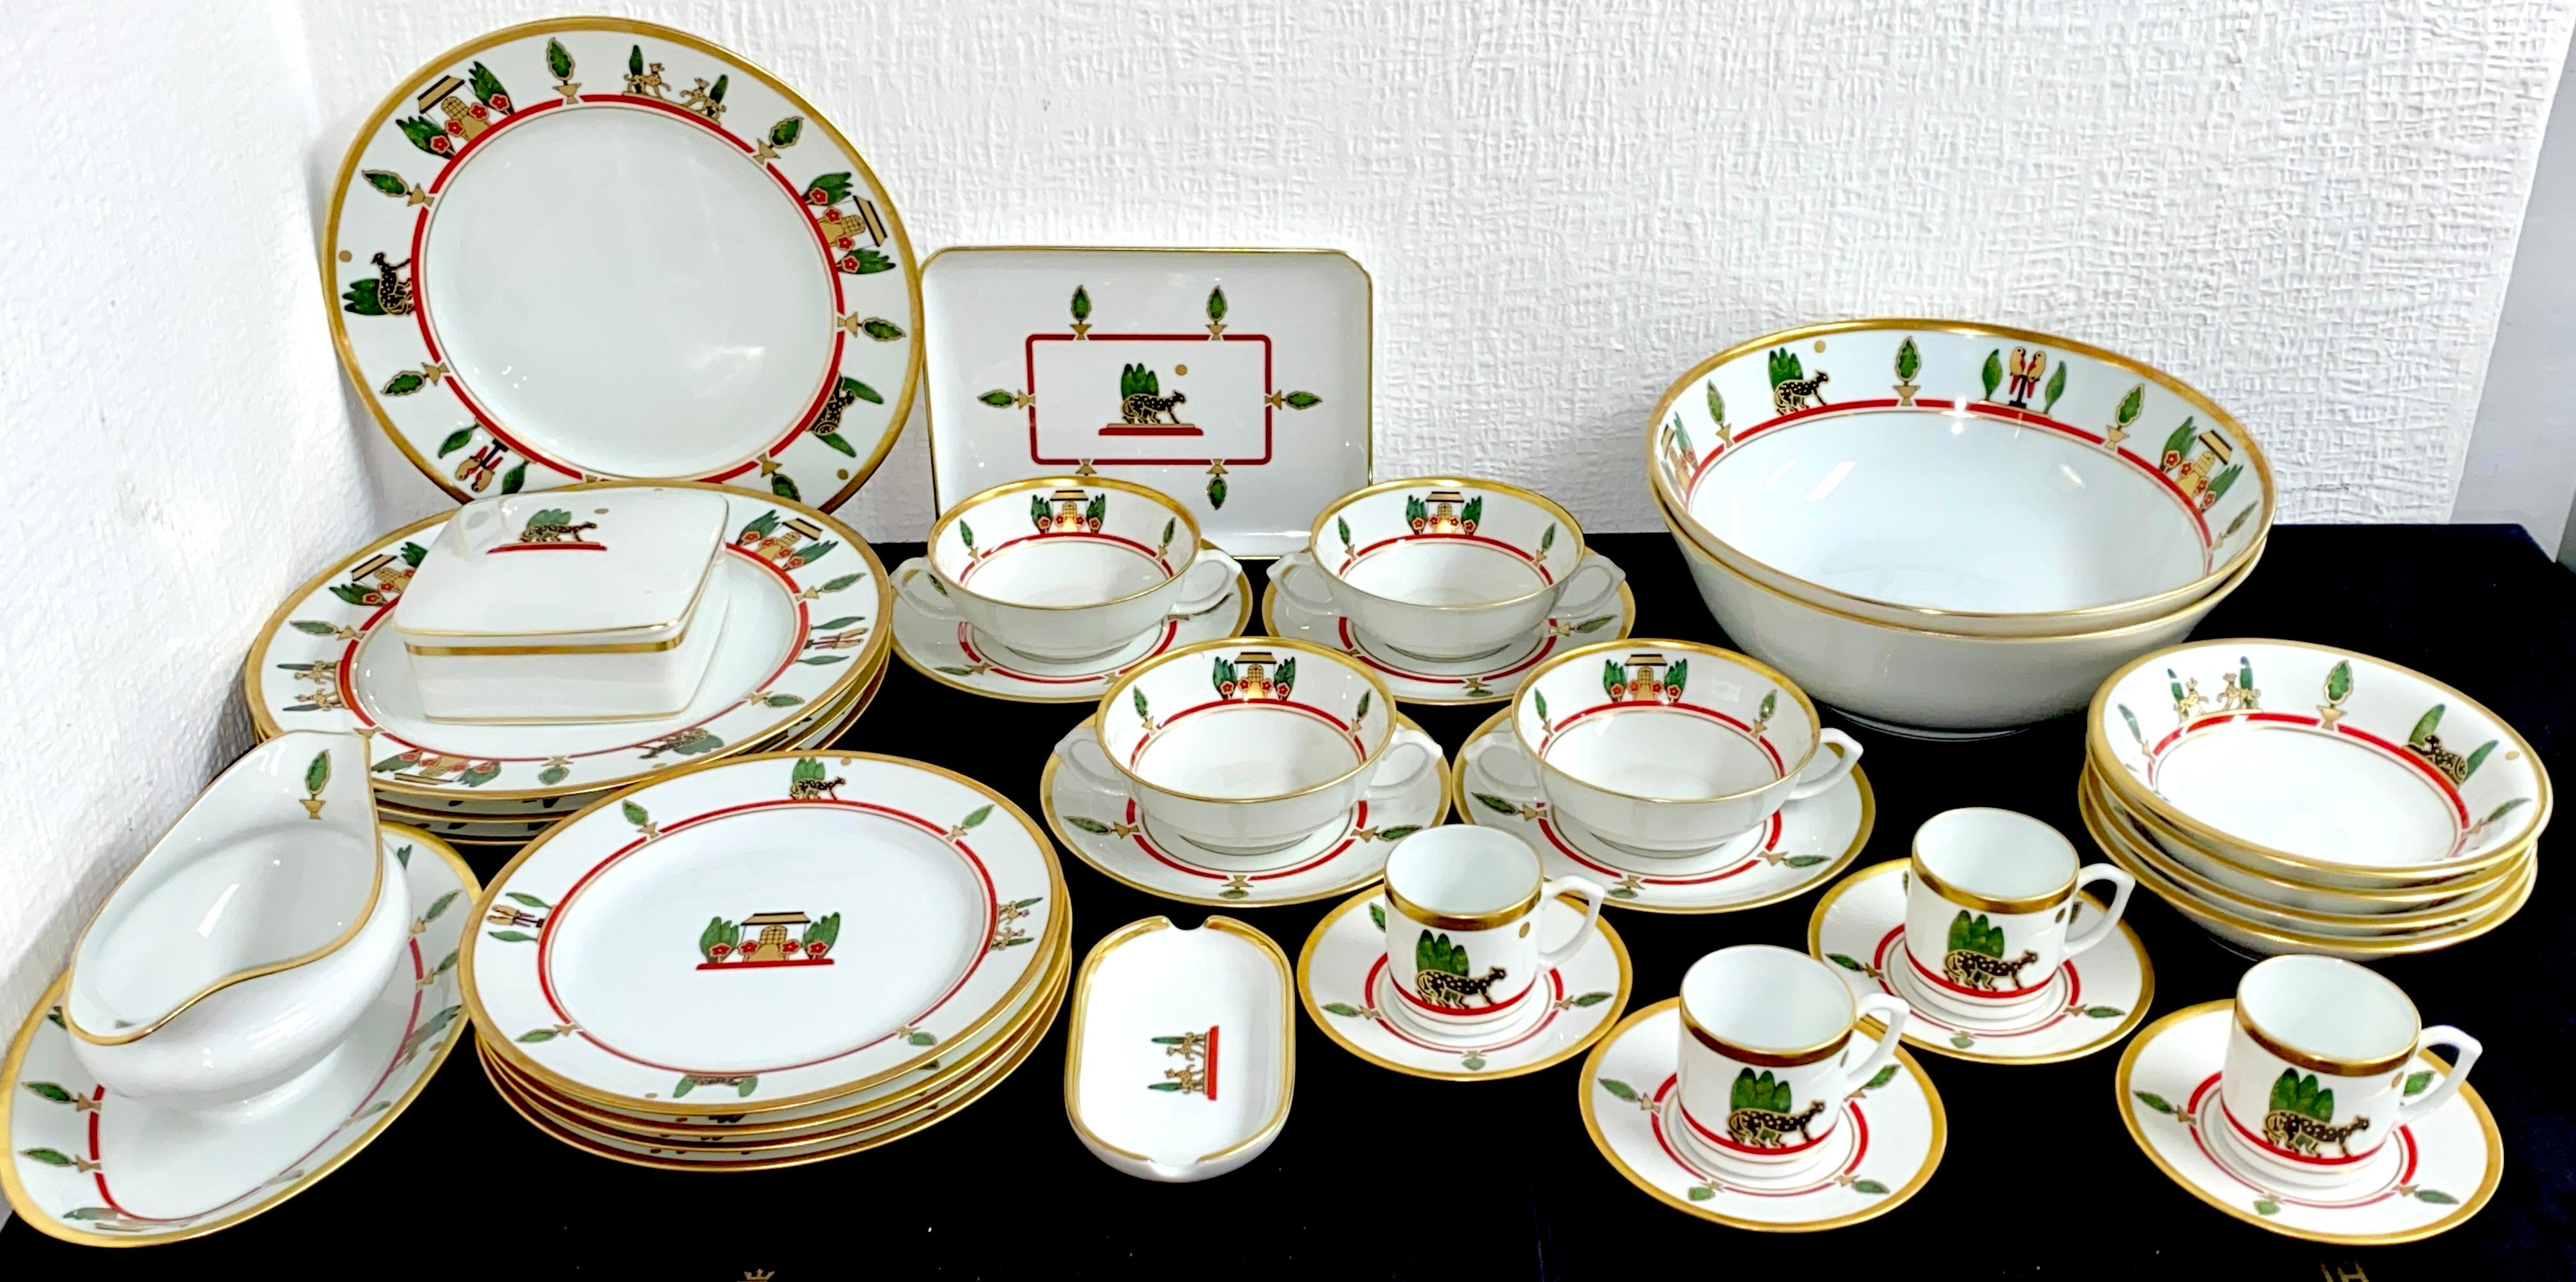 Representative dinnerware from Cartier Limoges. 34 pieces.

Designed 1986. Limoges porcelain, original Cartier decor with black panthers, gold painting and bushes.

Consisting of :

4 large dinner plates 26.5cm
4 dining place 21.5cm
2 large